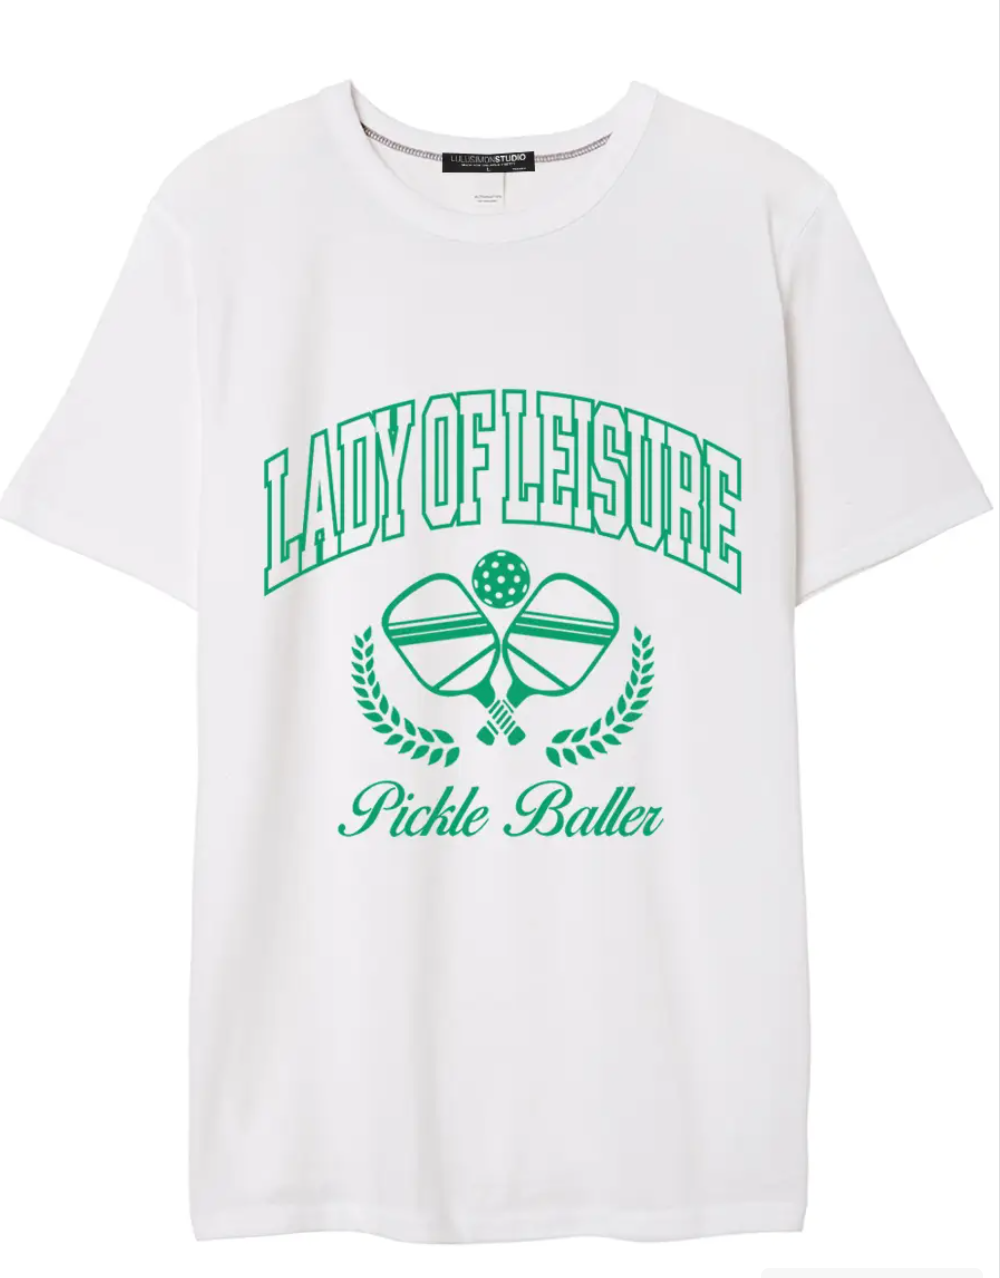 Lady of Leisure Pickle Baller Tee